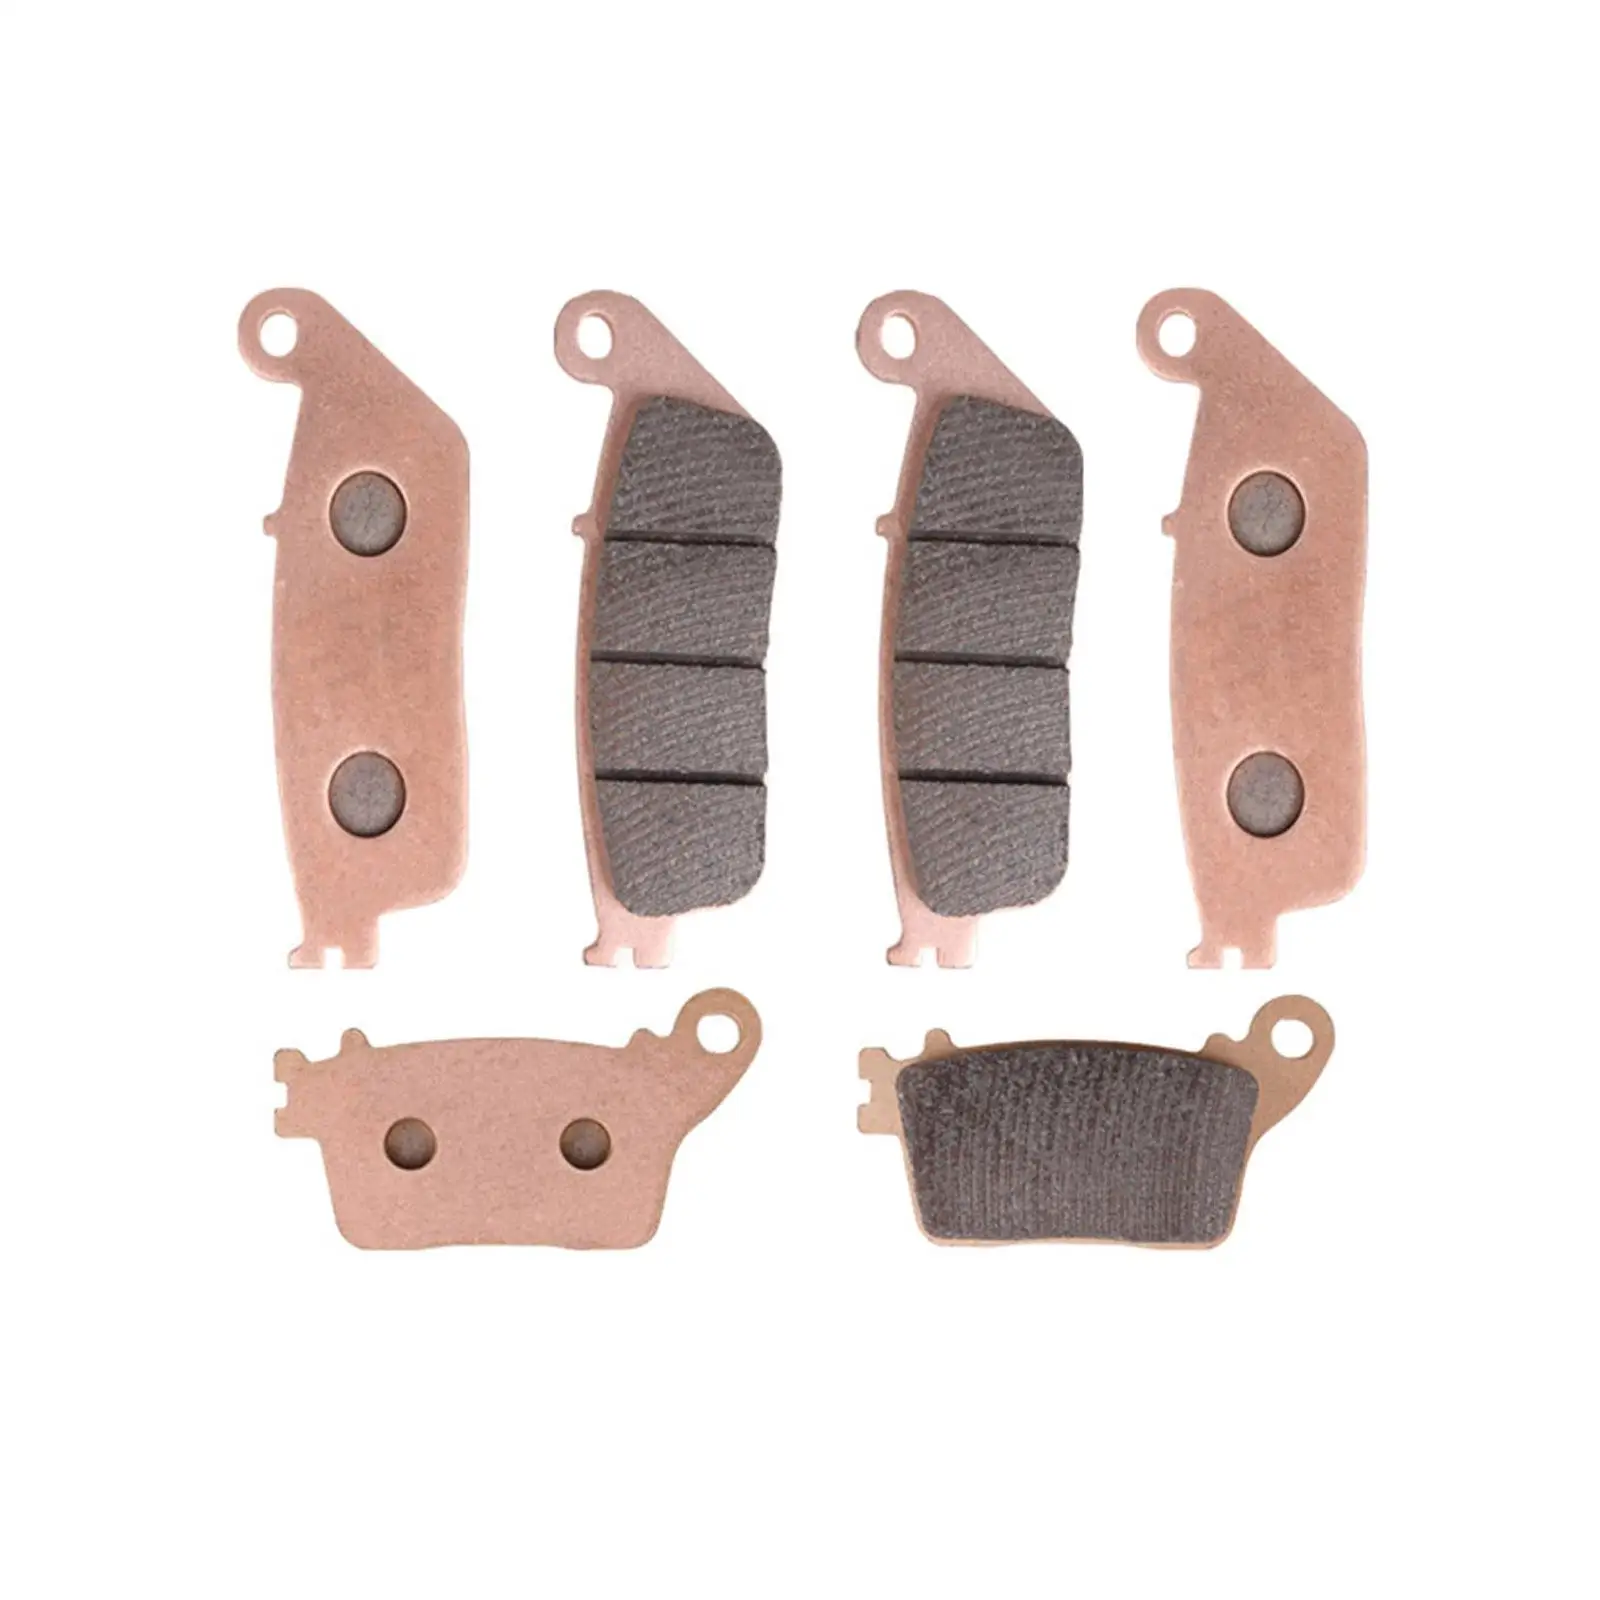 6Pcs Front and Rear Brake Pads Set Motorcycle Replacement Part for Honda Hornet Quality Professional Repair Part